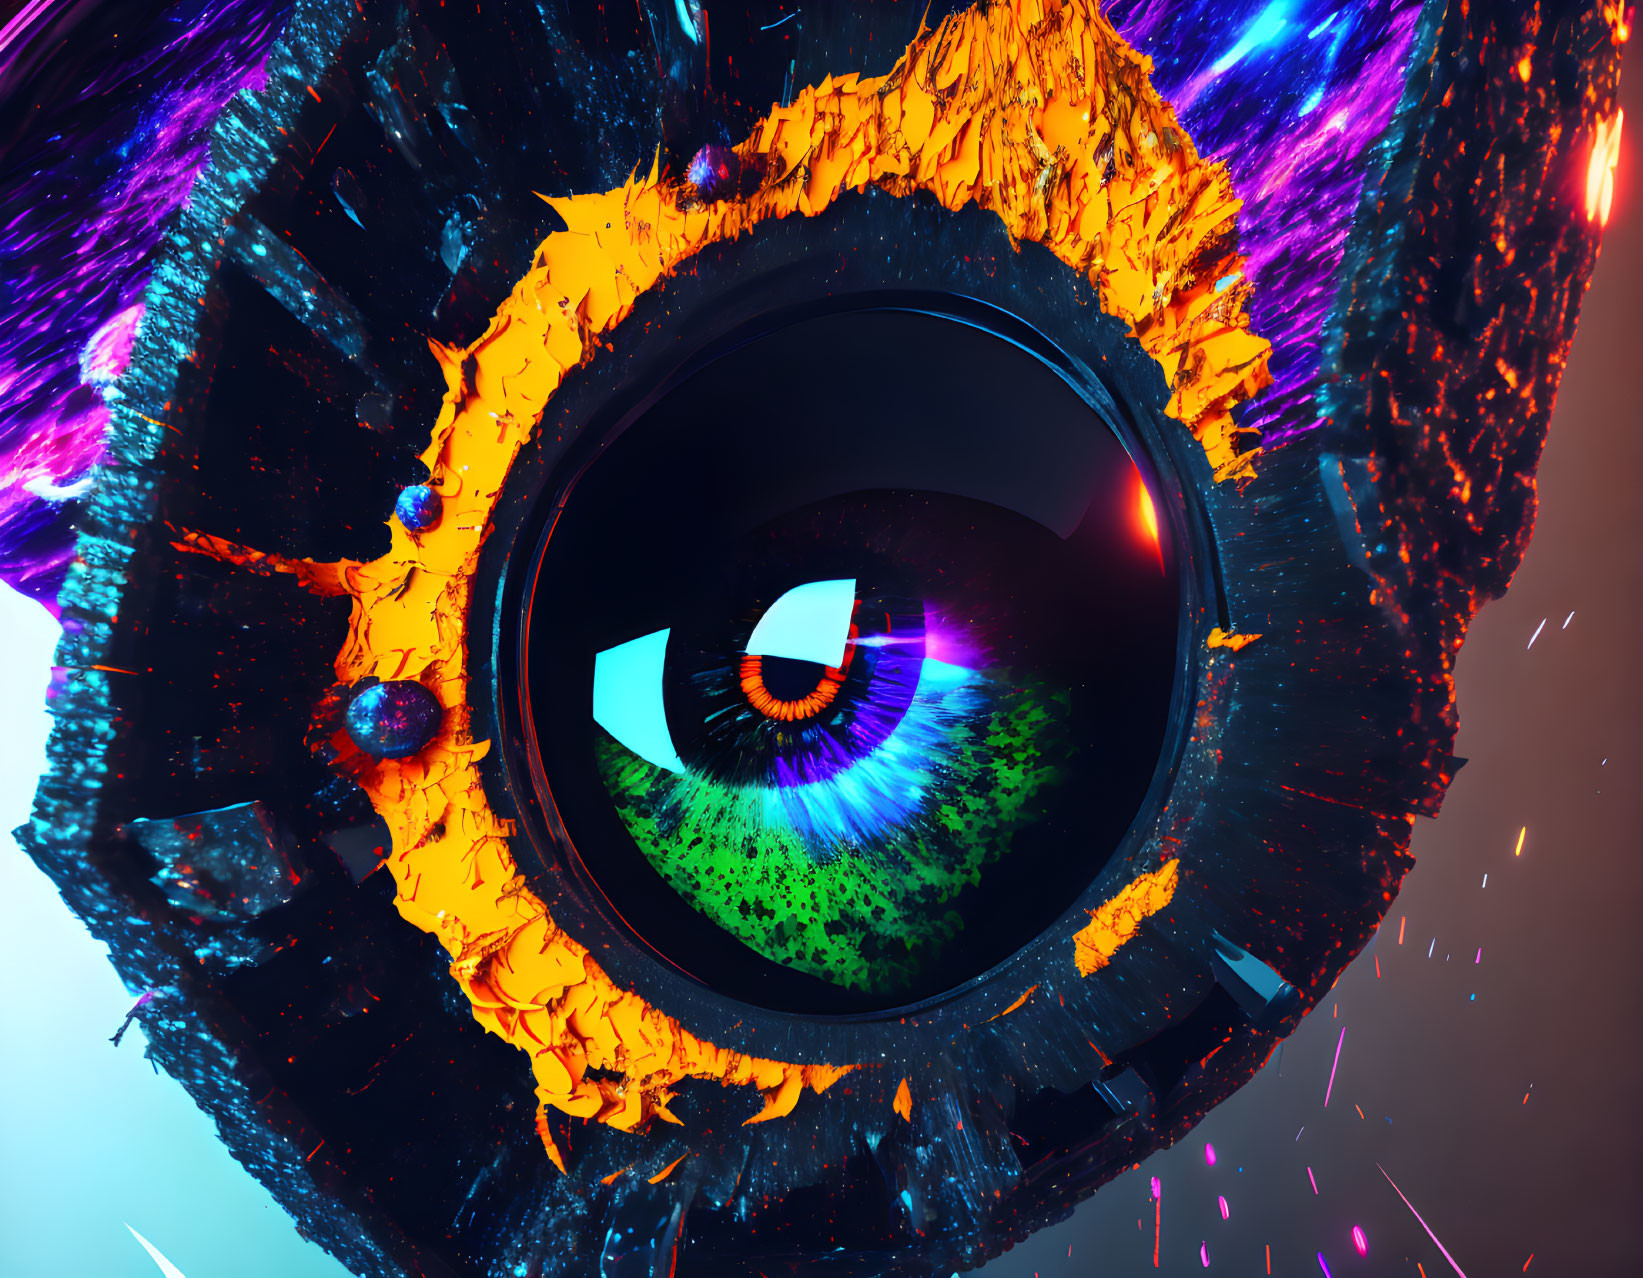 Colorful Digital Artwork: Eye with Fragmented Ring and Cosmic Background